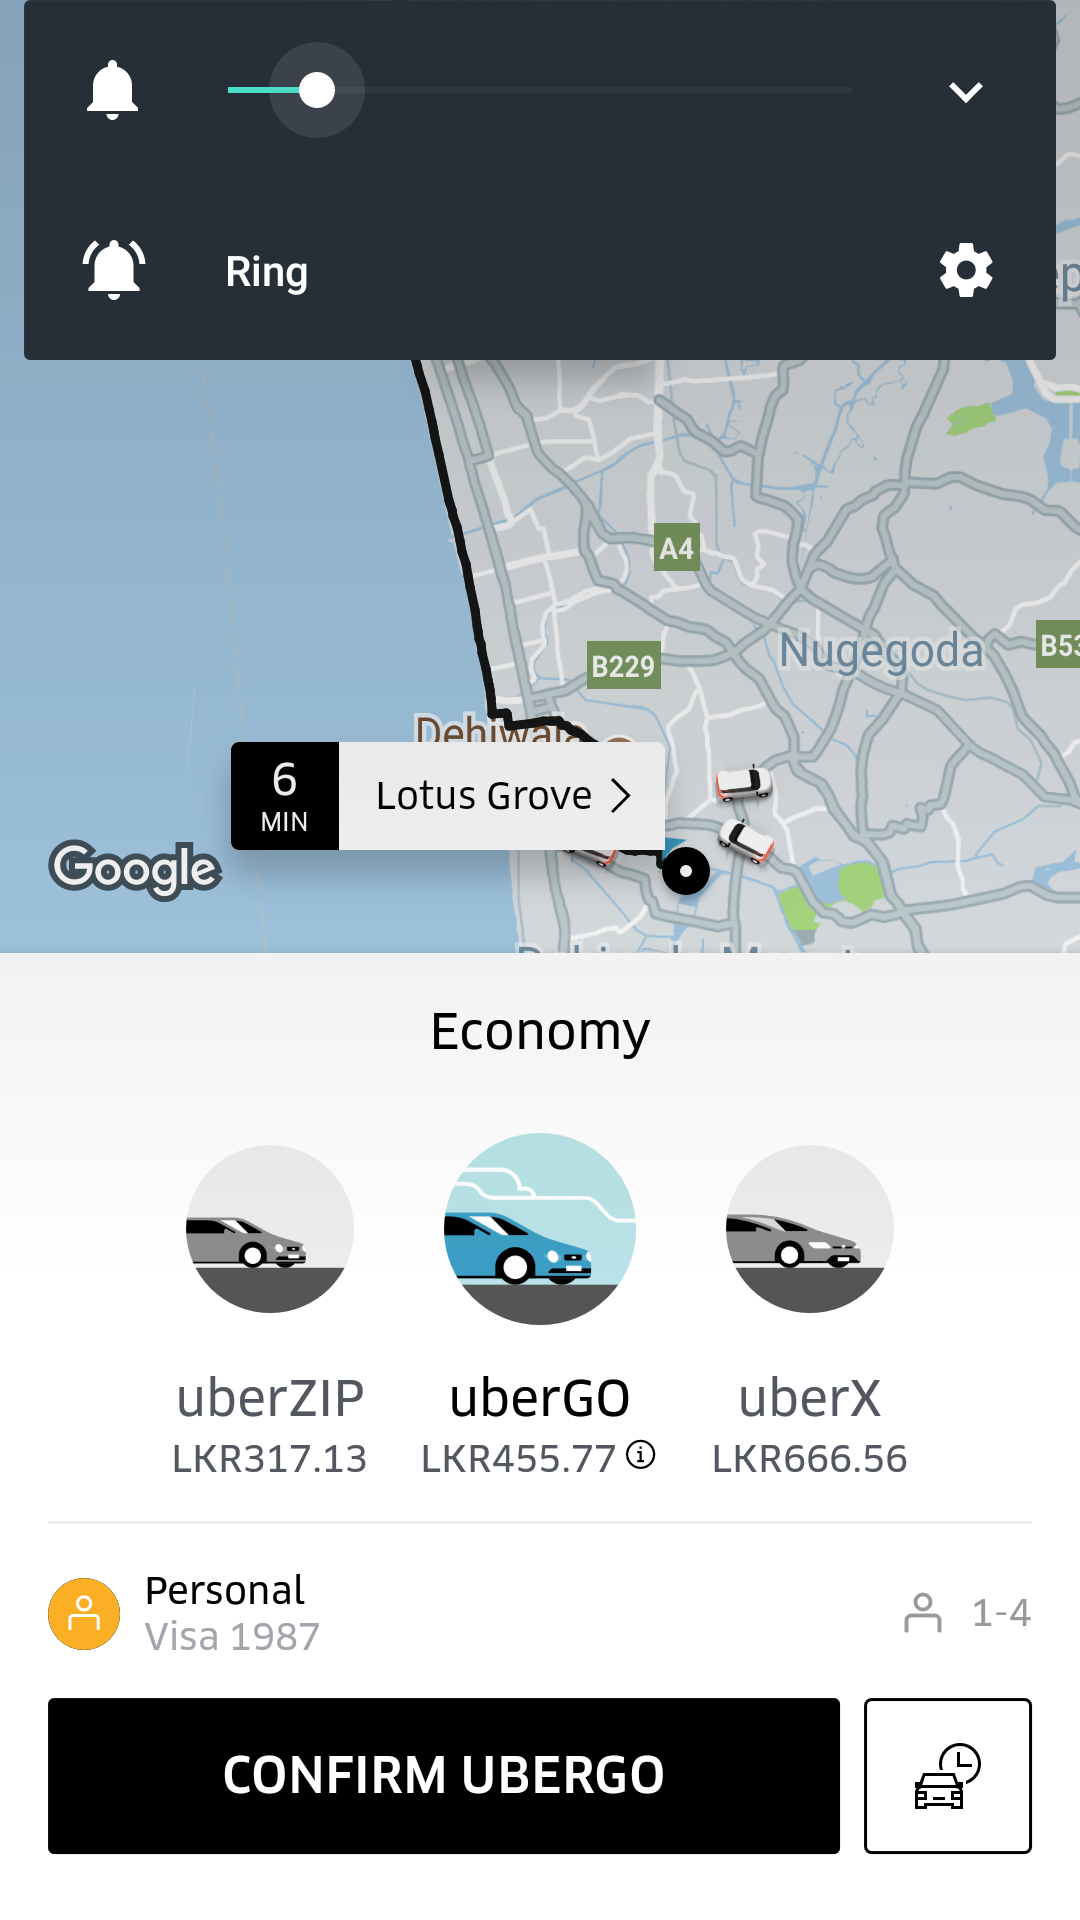 Uber is destroying the taxi market in Sri Lanka